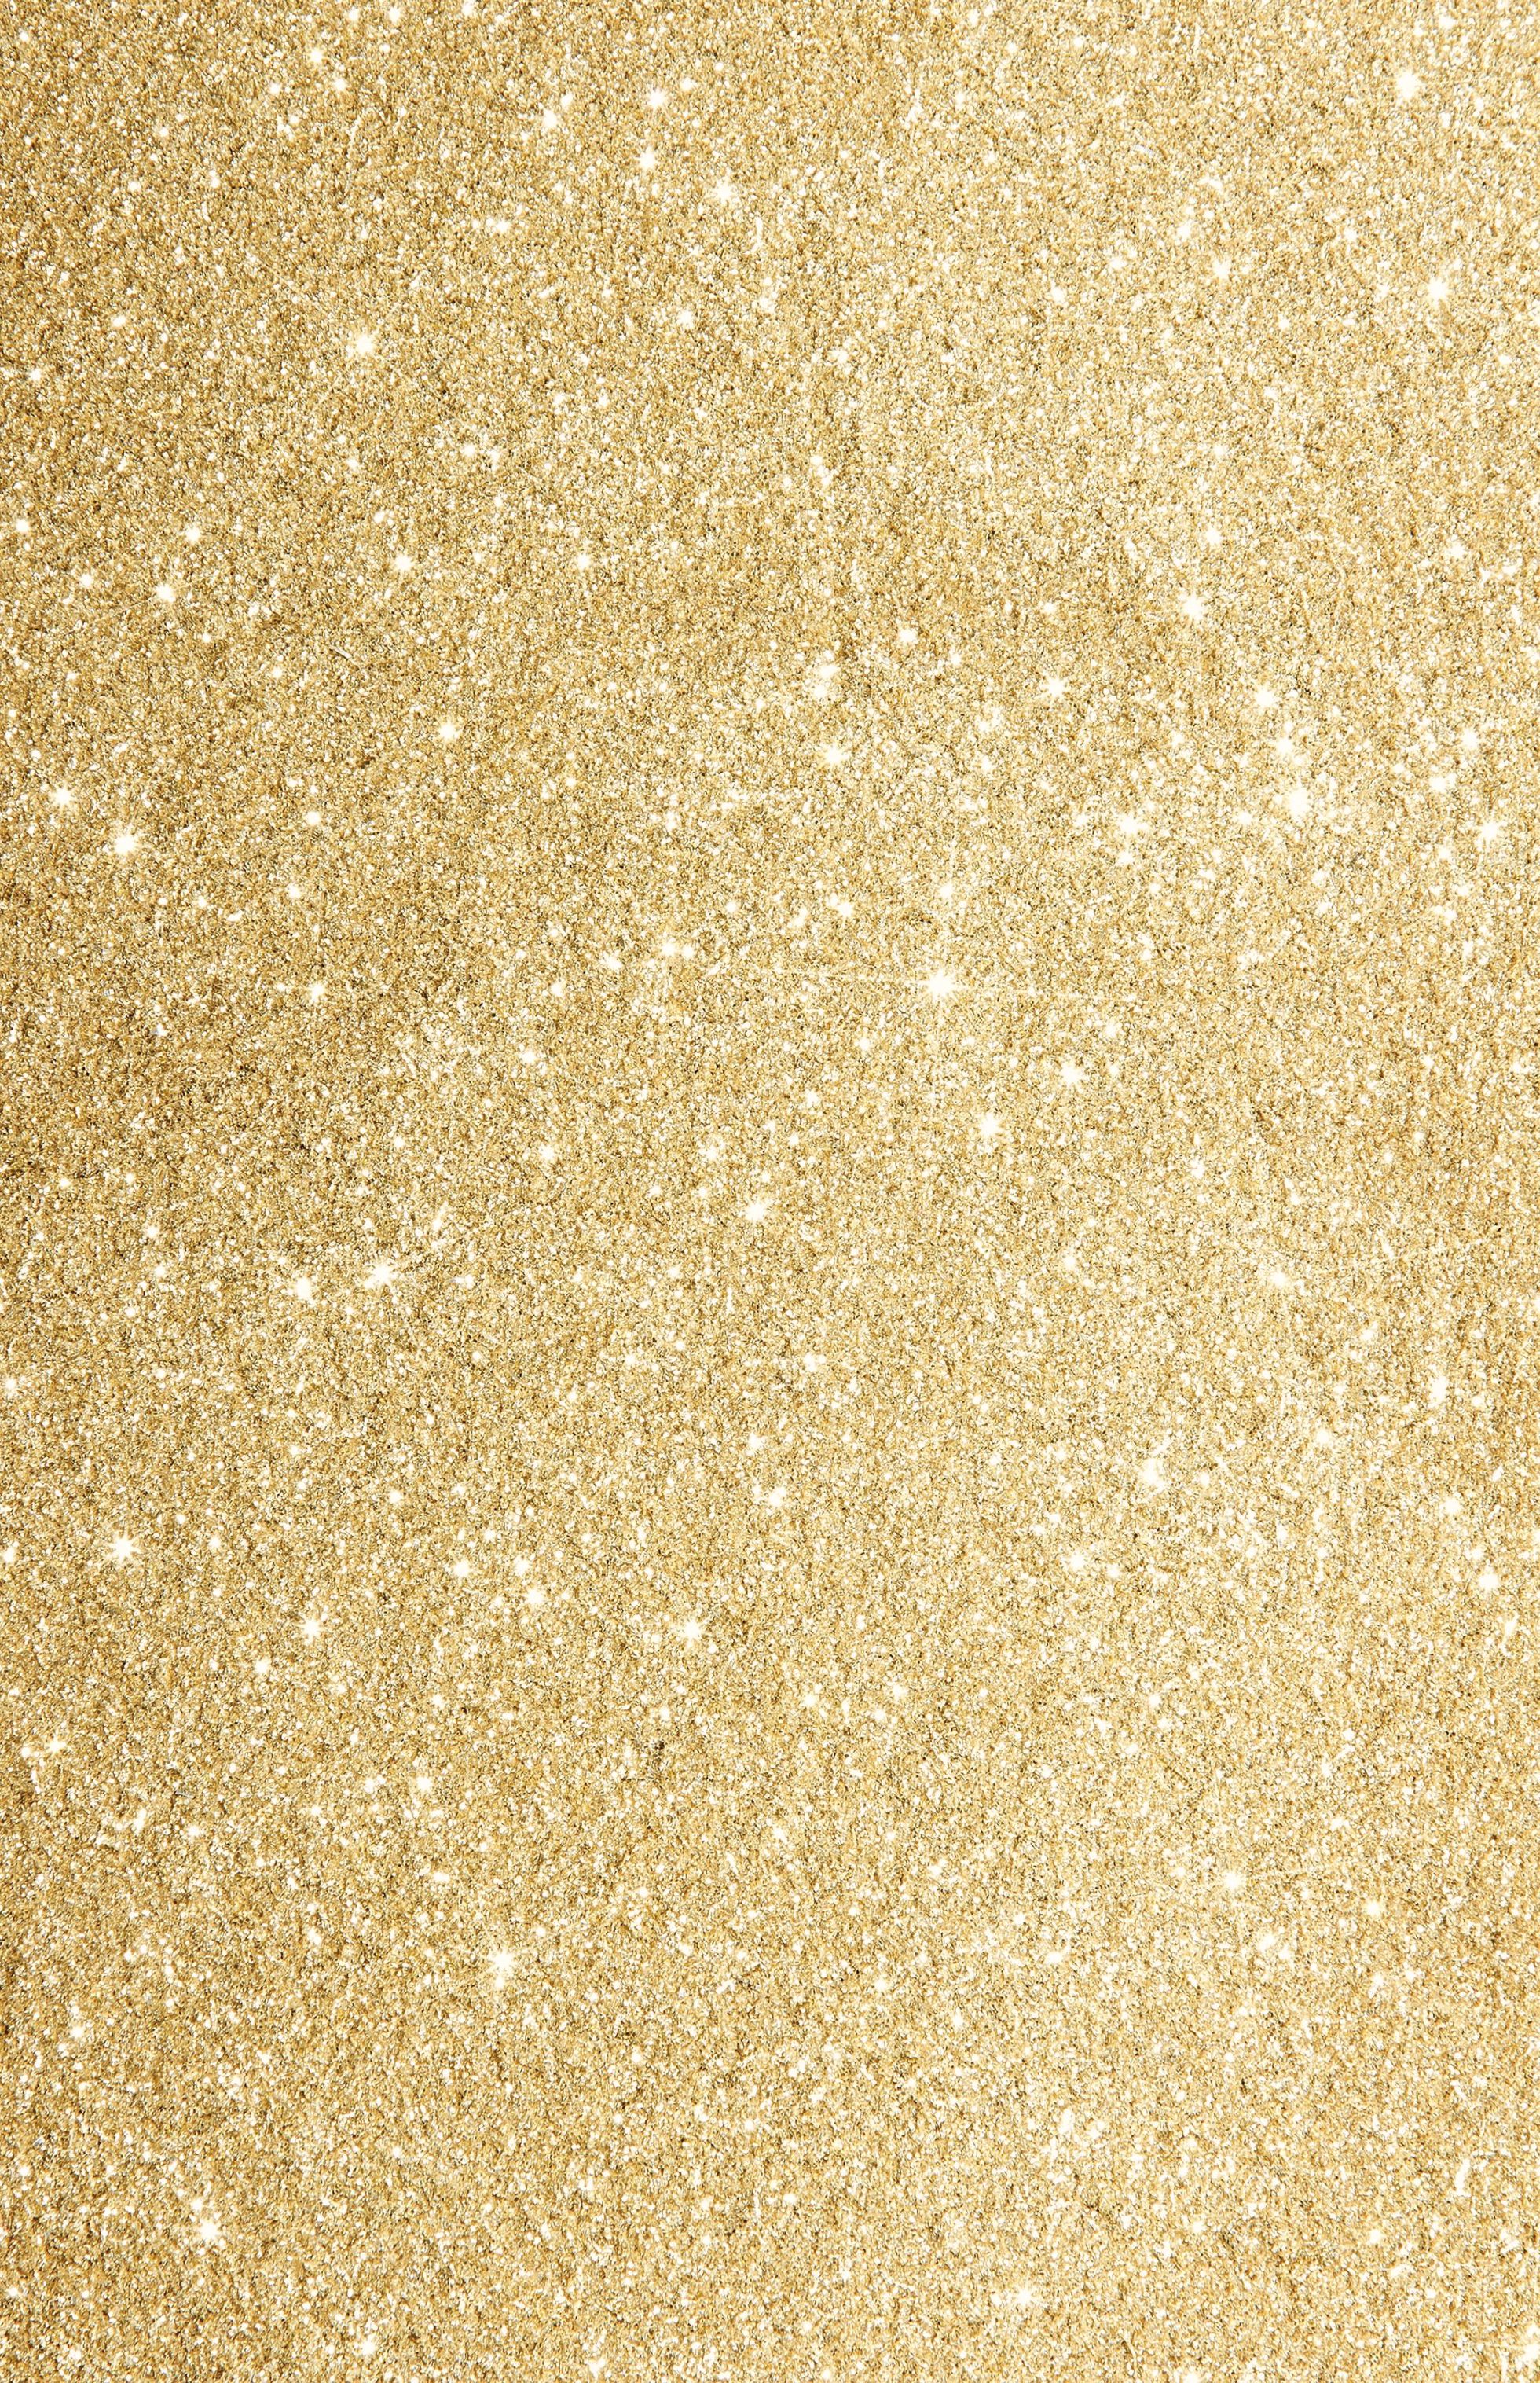 Gold Glitter background Ms Displays Gold wallpaper Gold